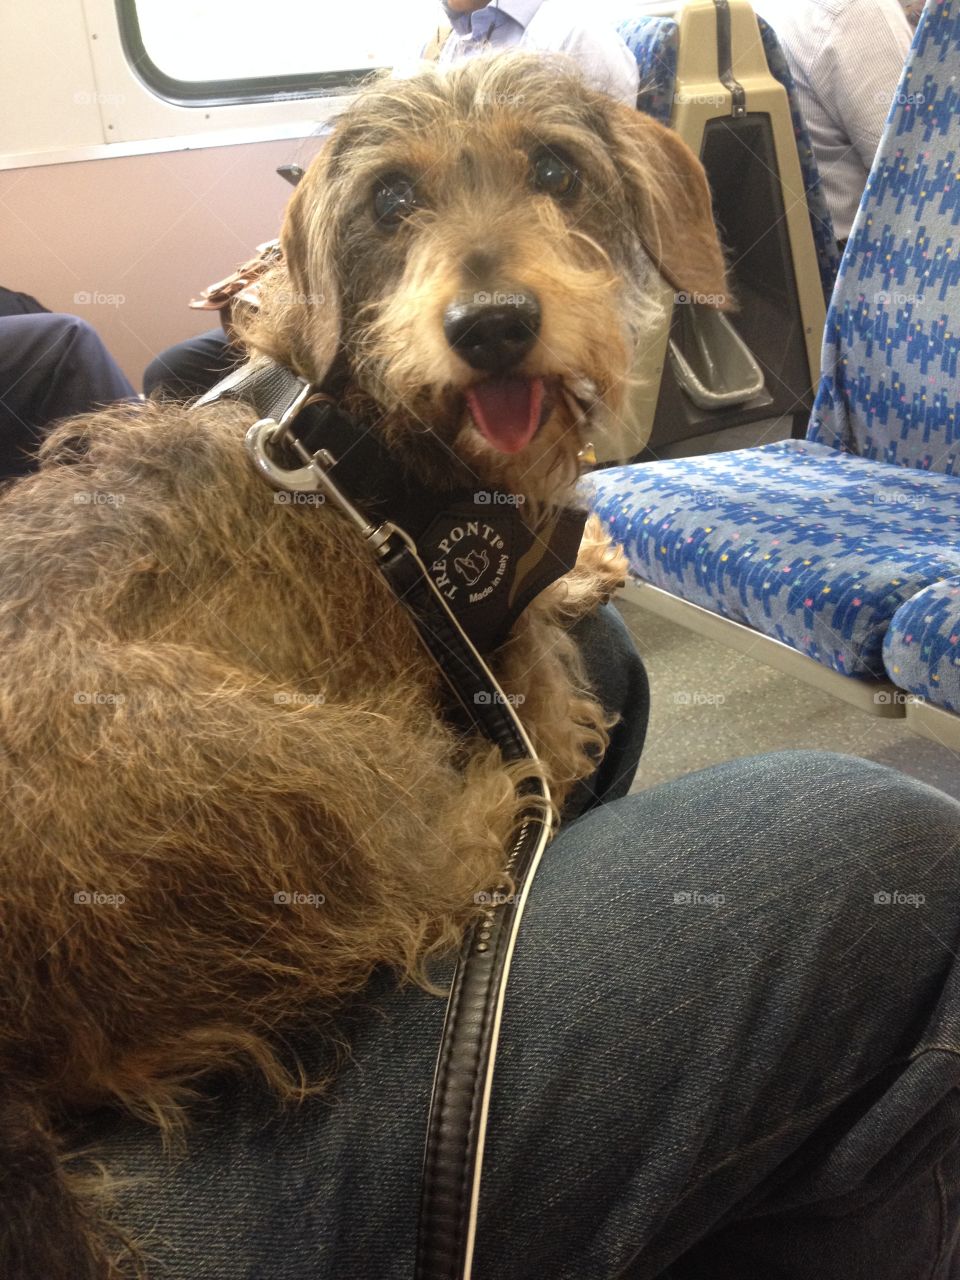 Rocky taking a trip on the train